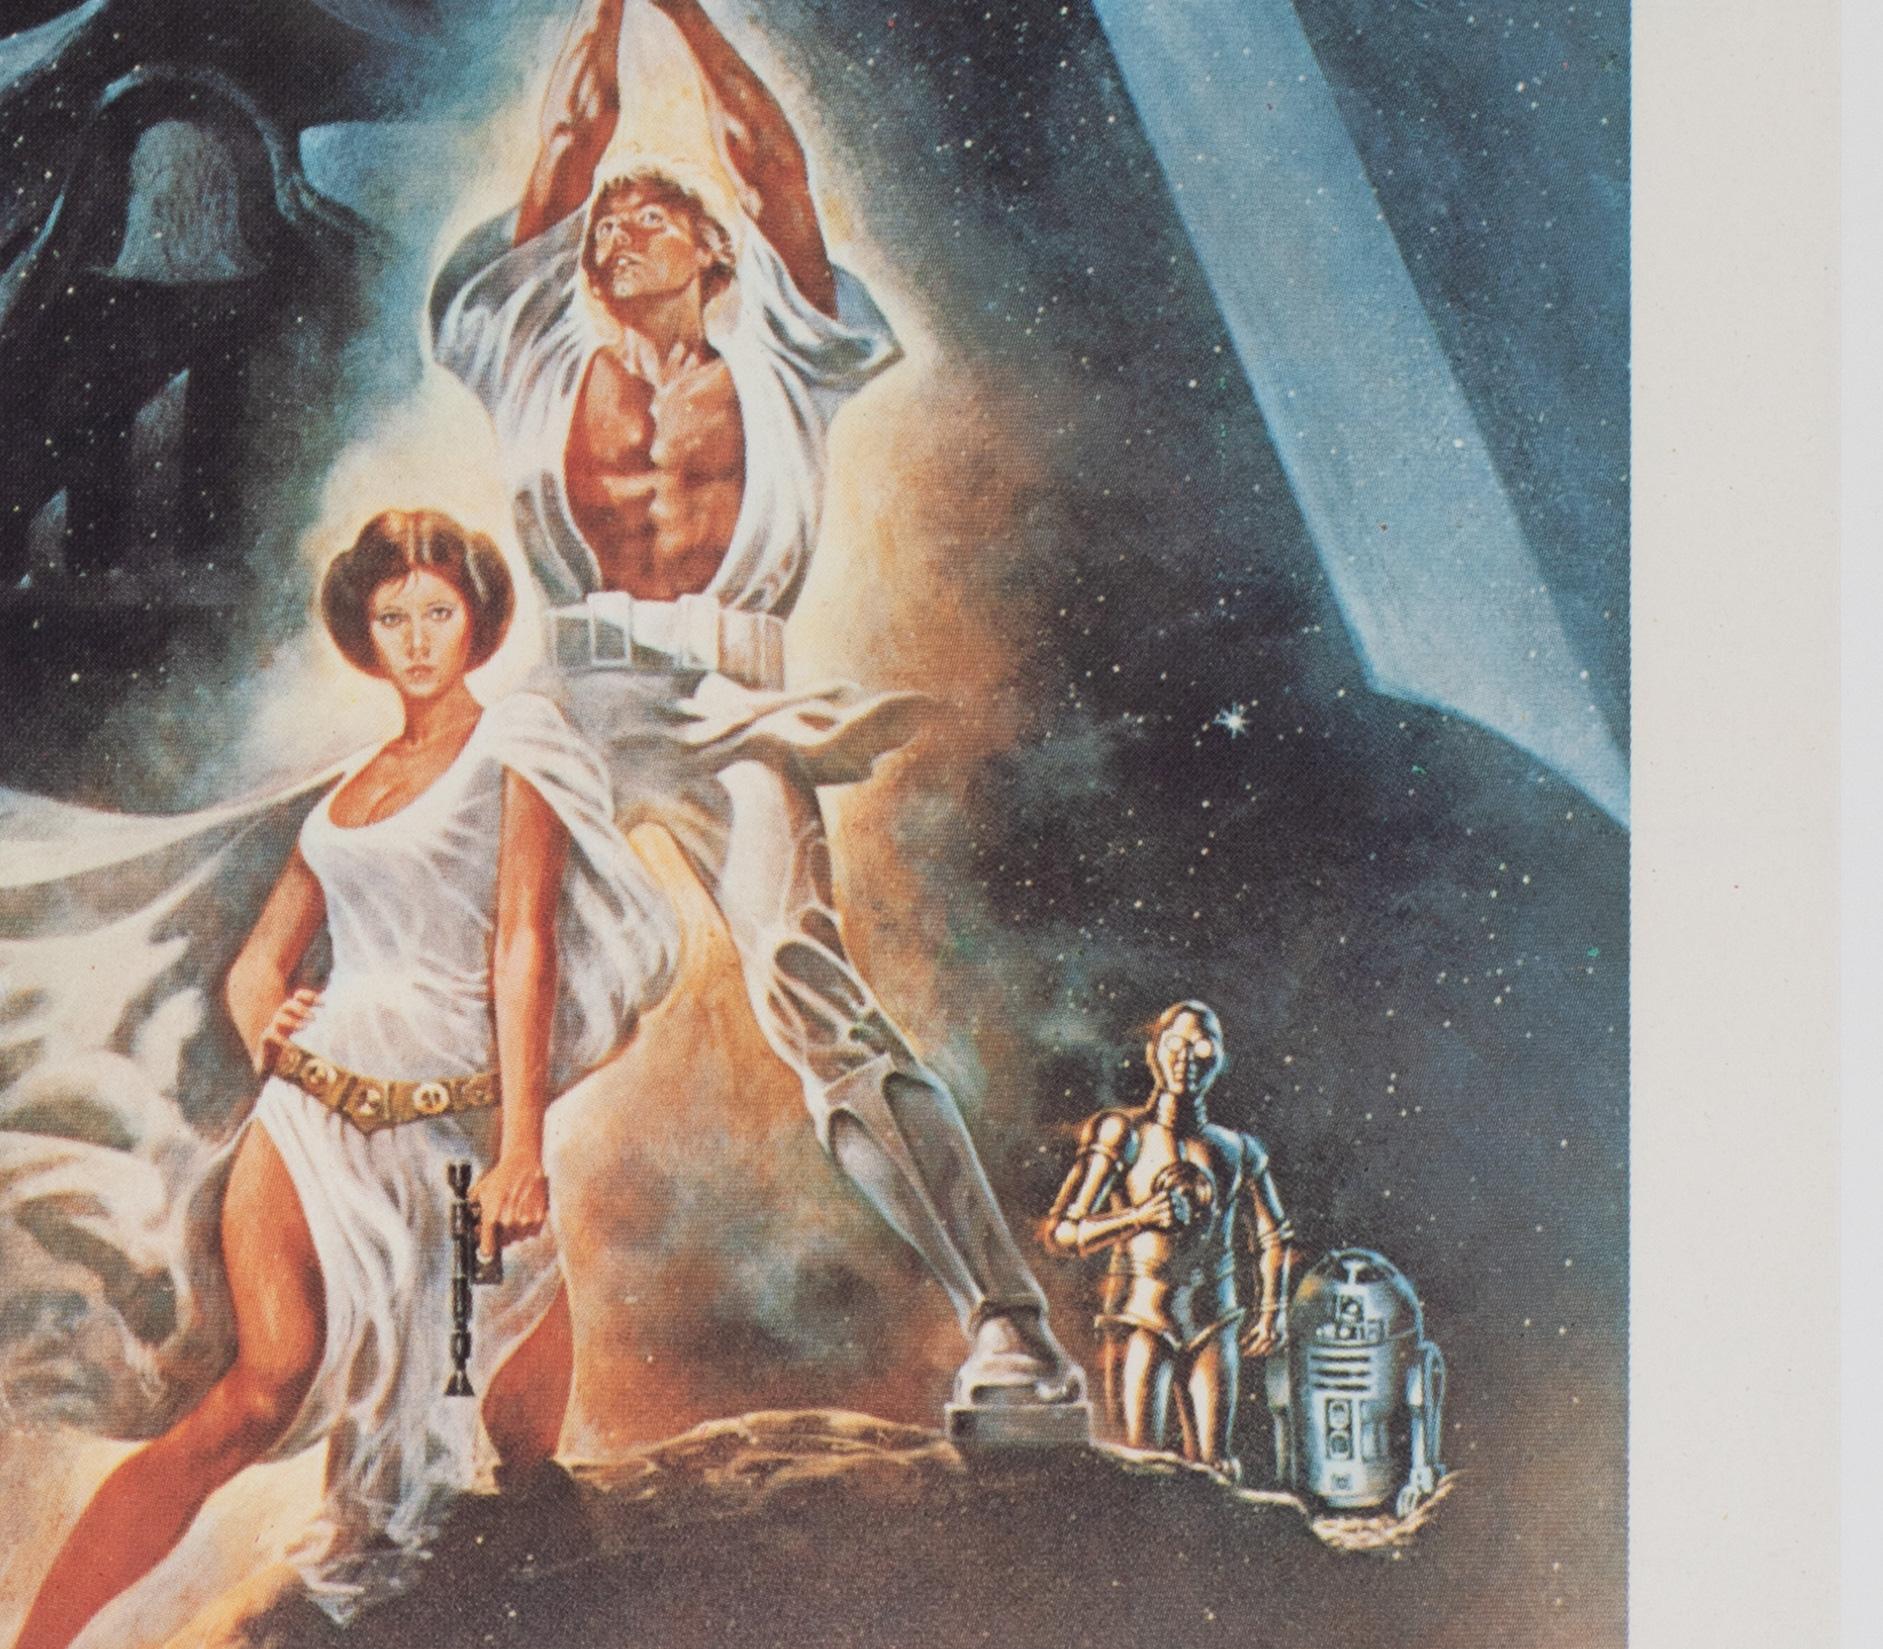 STAR WARS 1977 French Moyenne Film Movie Poster, TOM JUNG For Sale 1